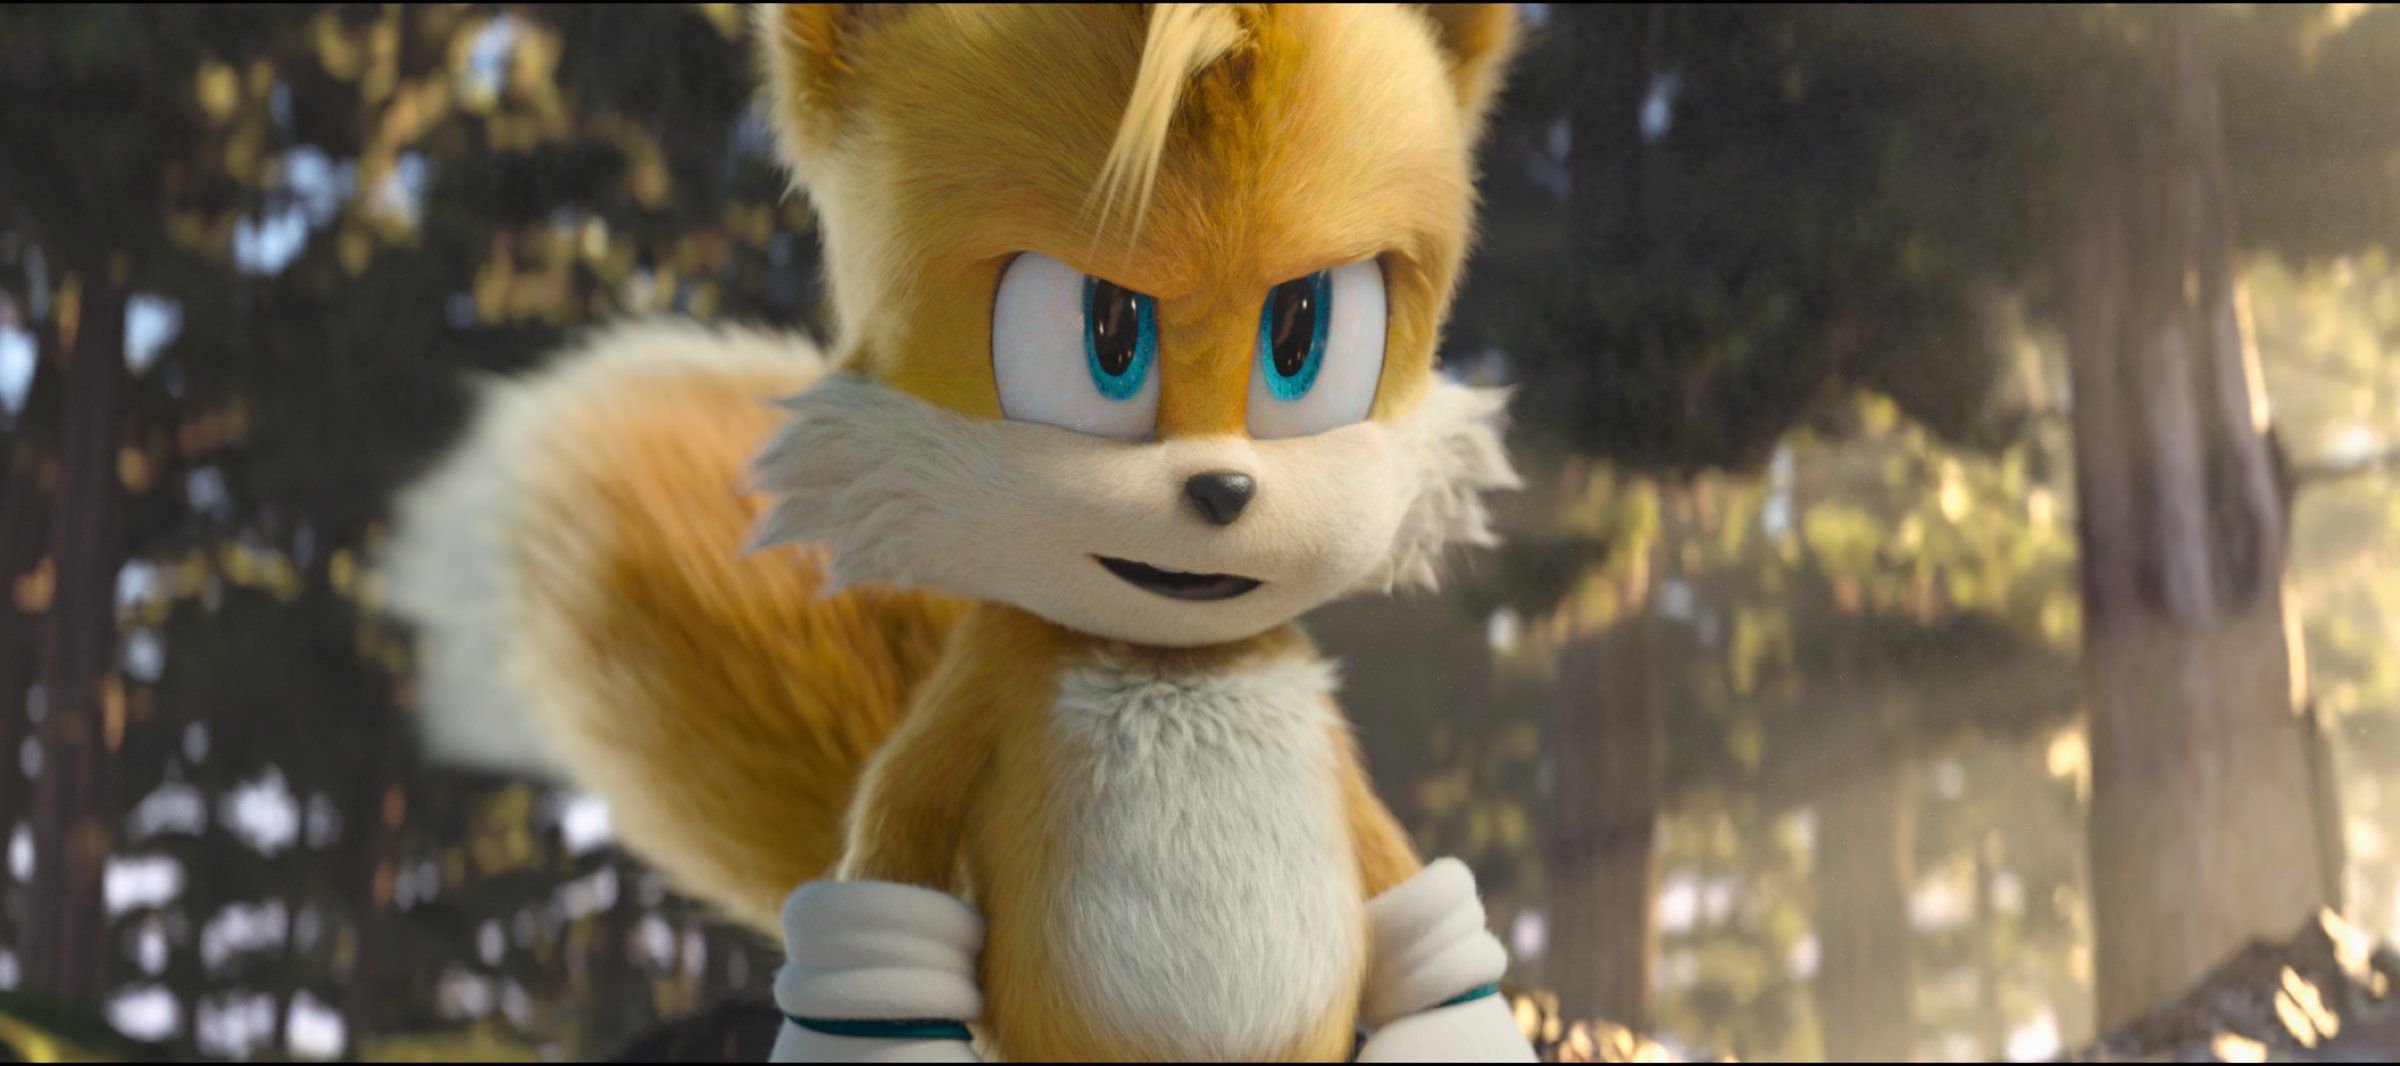 Tails revealing himself to Sonic in a moment of danger.